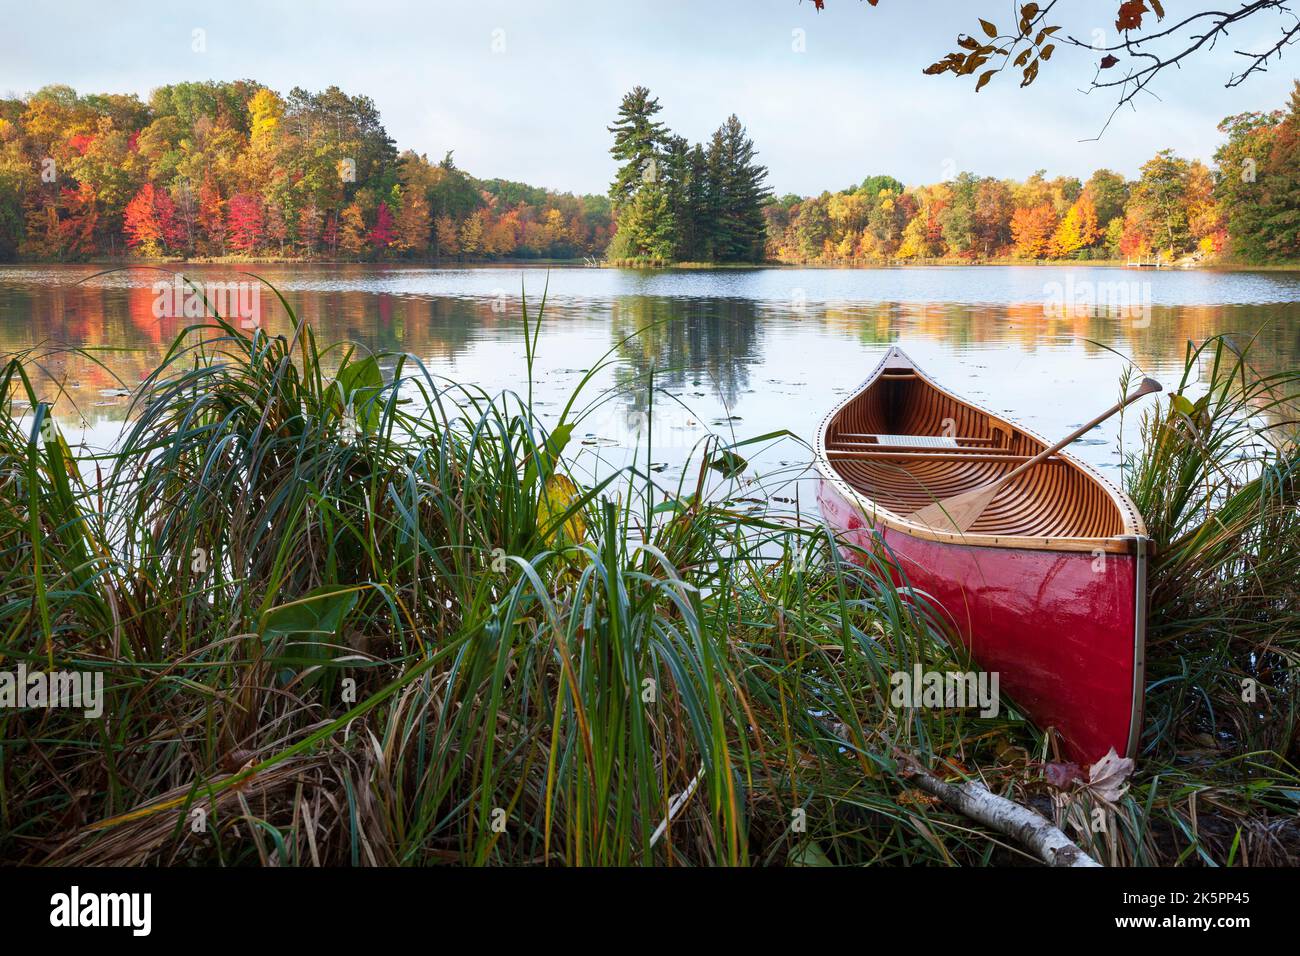 Red wooden canoe on shore of lake with trees in autumn color and a small island Stock Photo